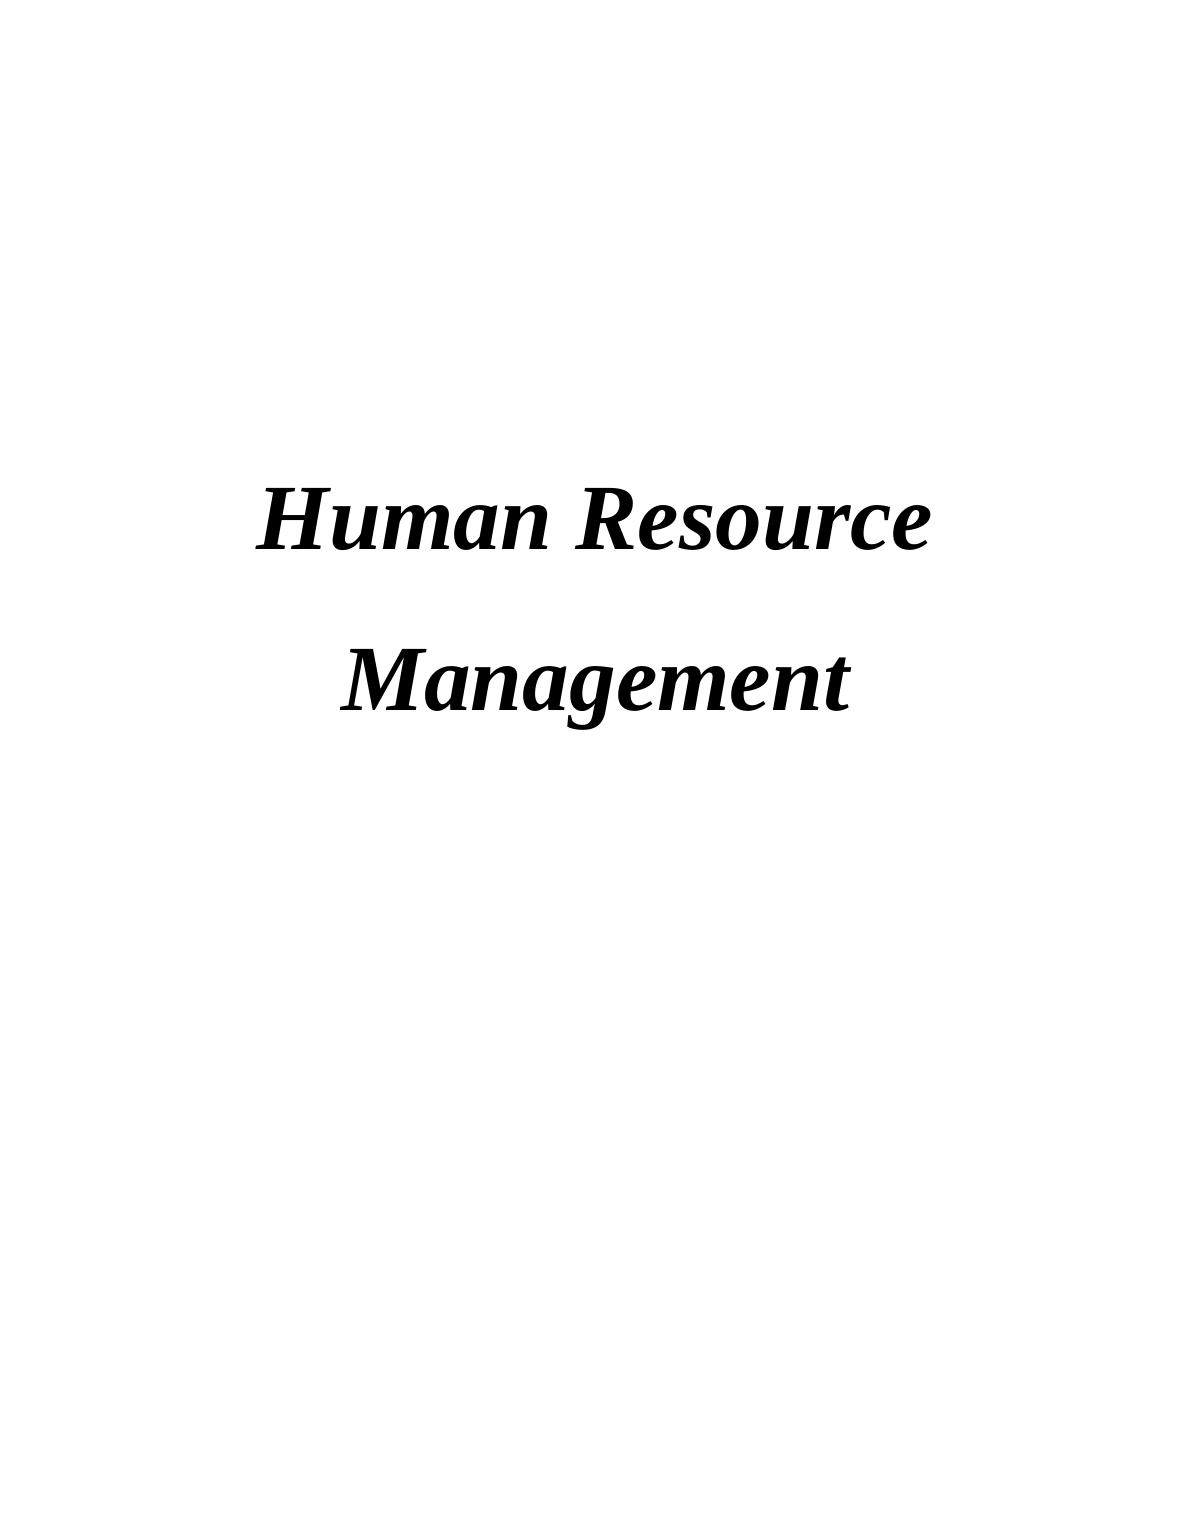 Dissimilar HRM Practices for Employee Selection and Recruitment Part 13 Introduction_1